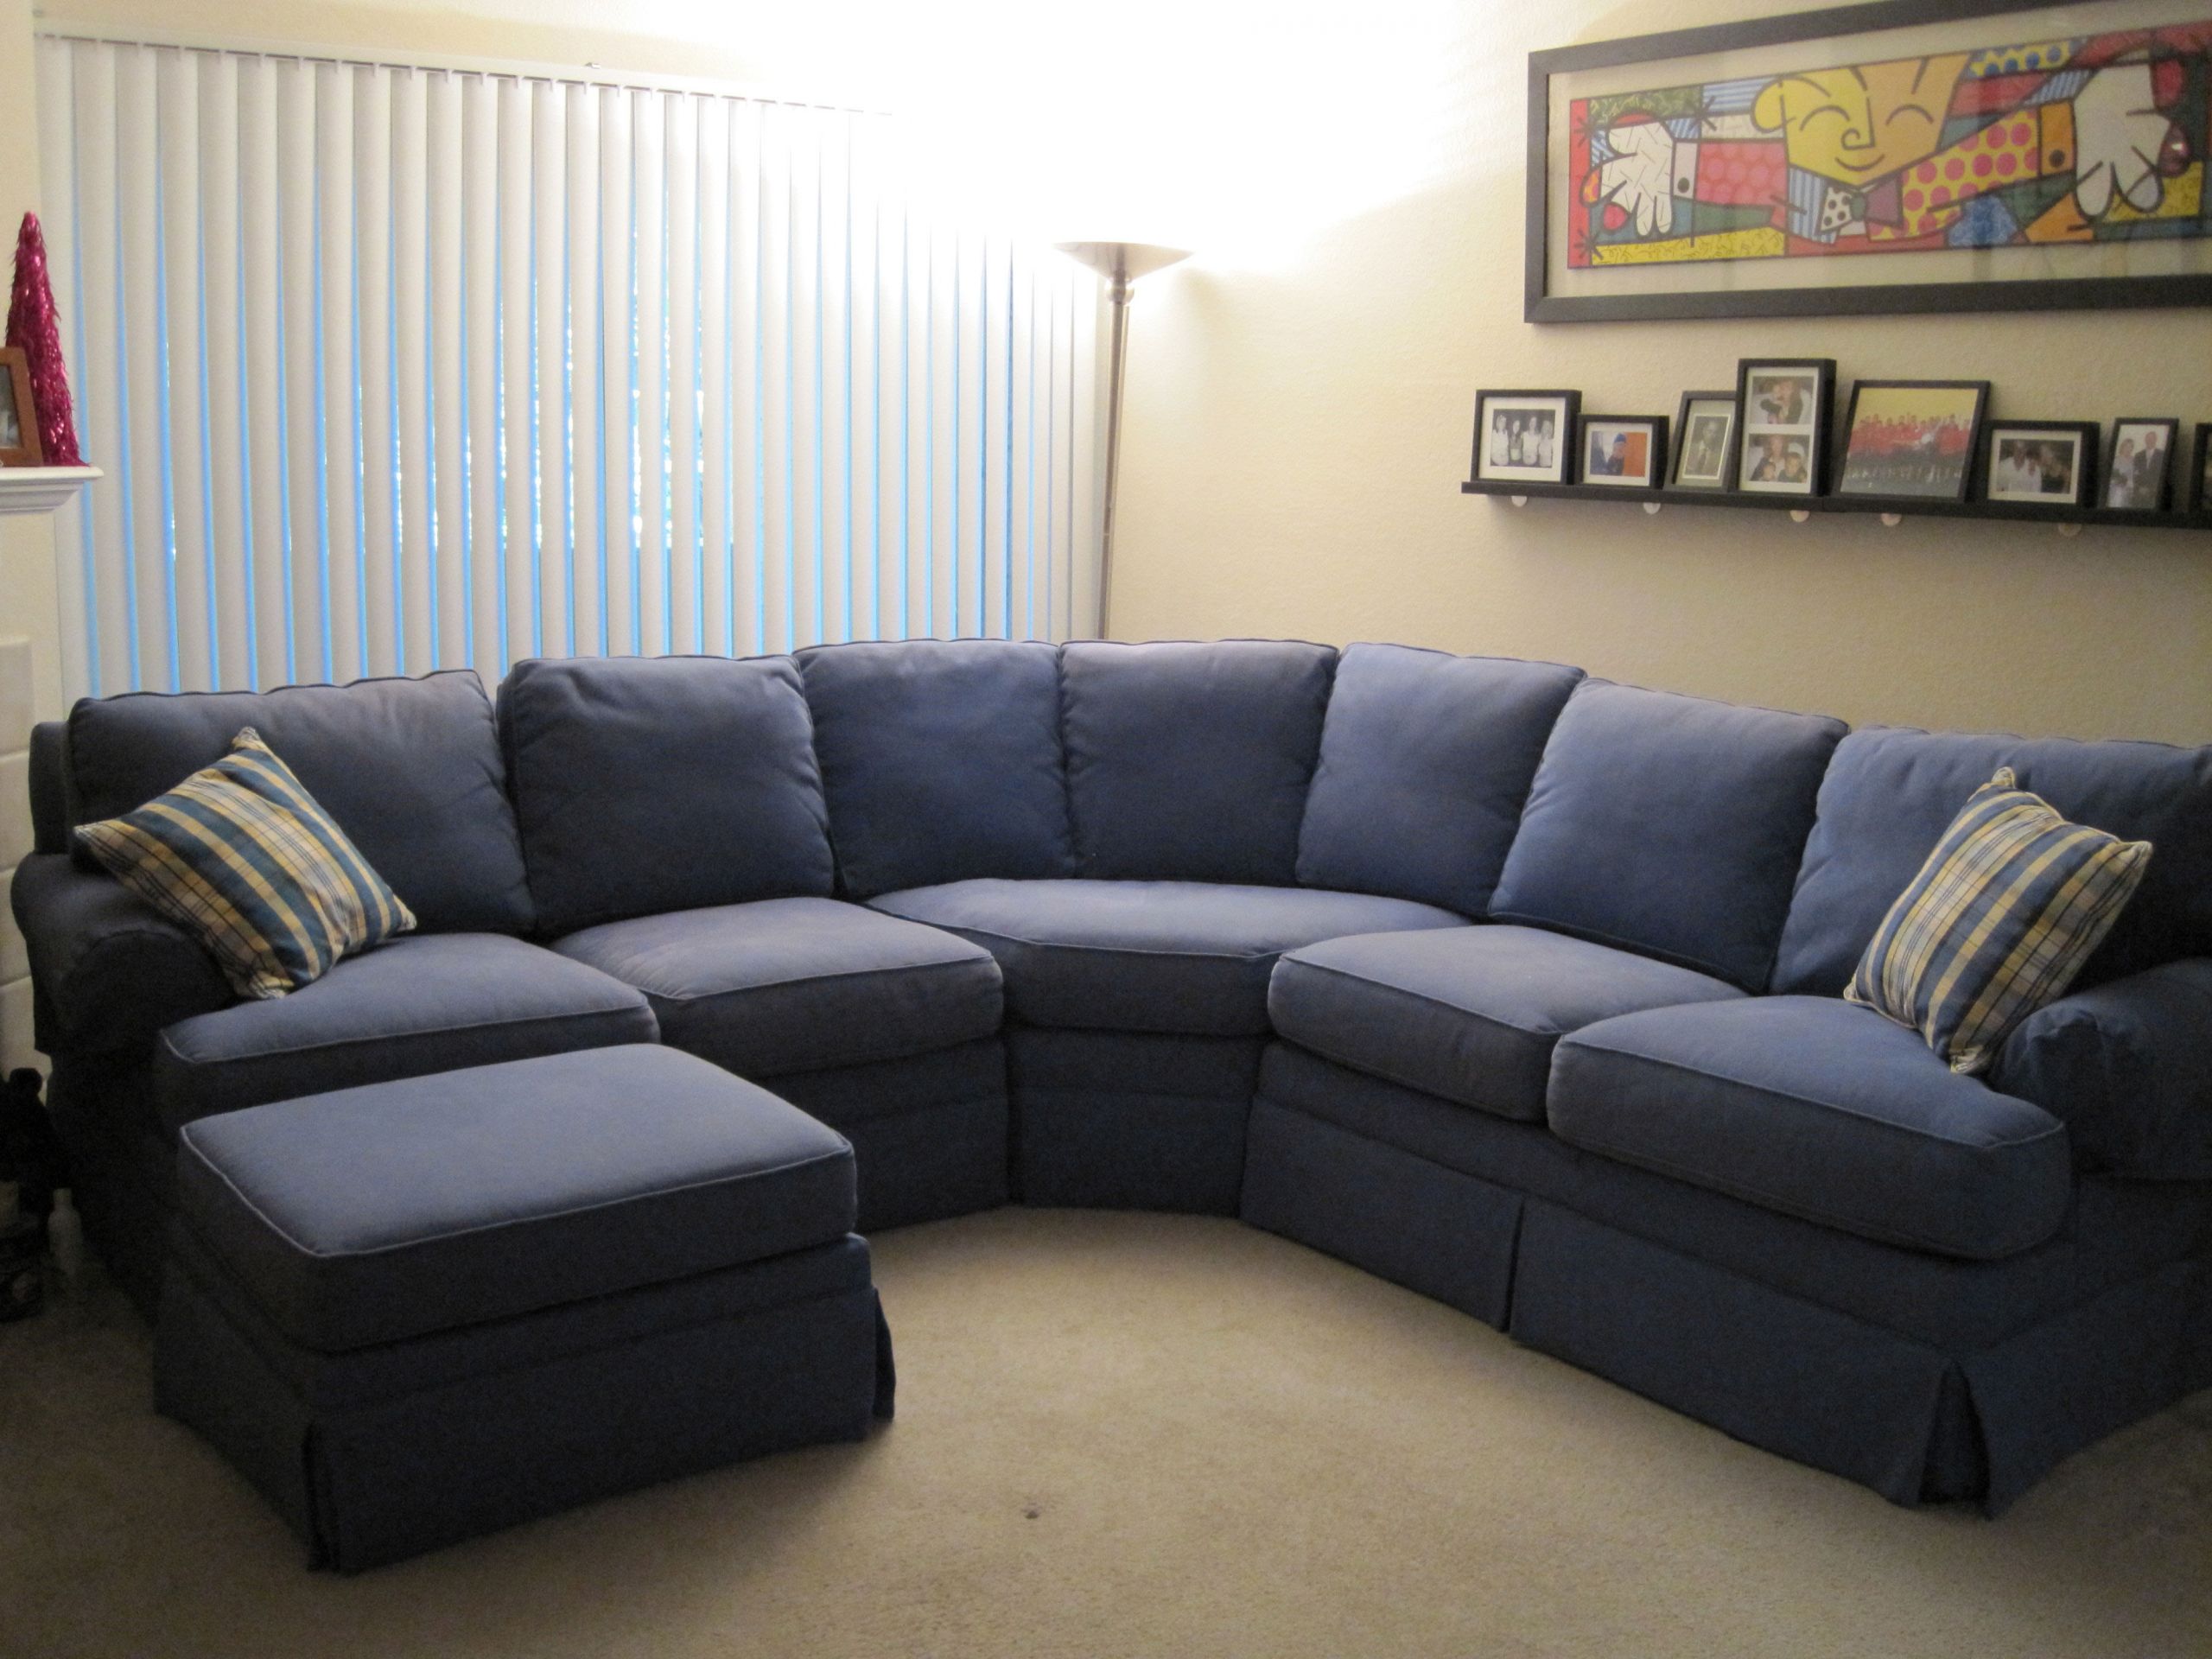 Small Living Room With Sectionals
 Living Rooms with Sectionals Sofa for Small Living Room